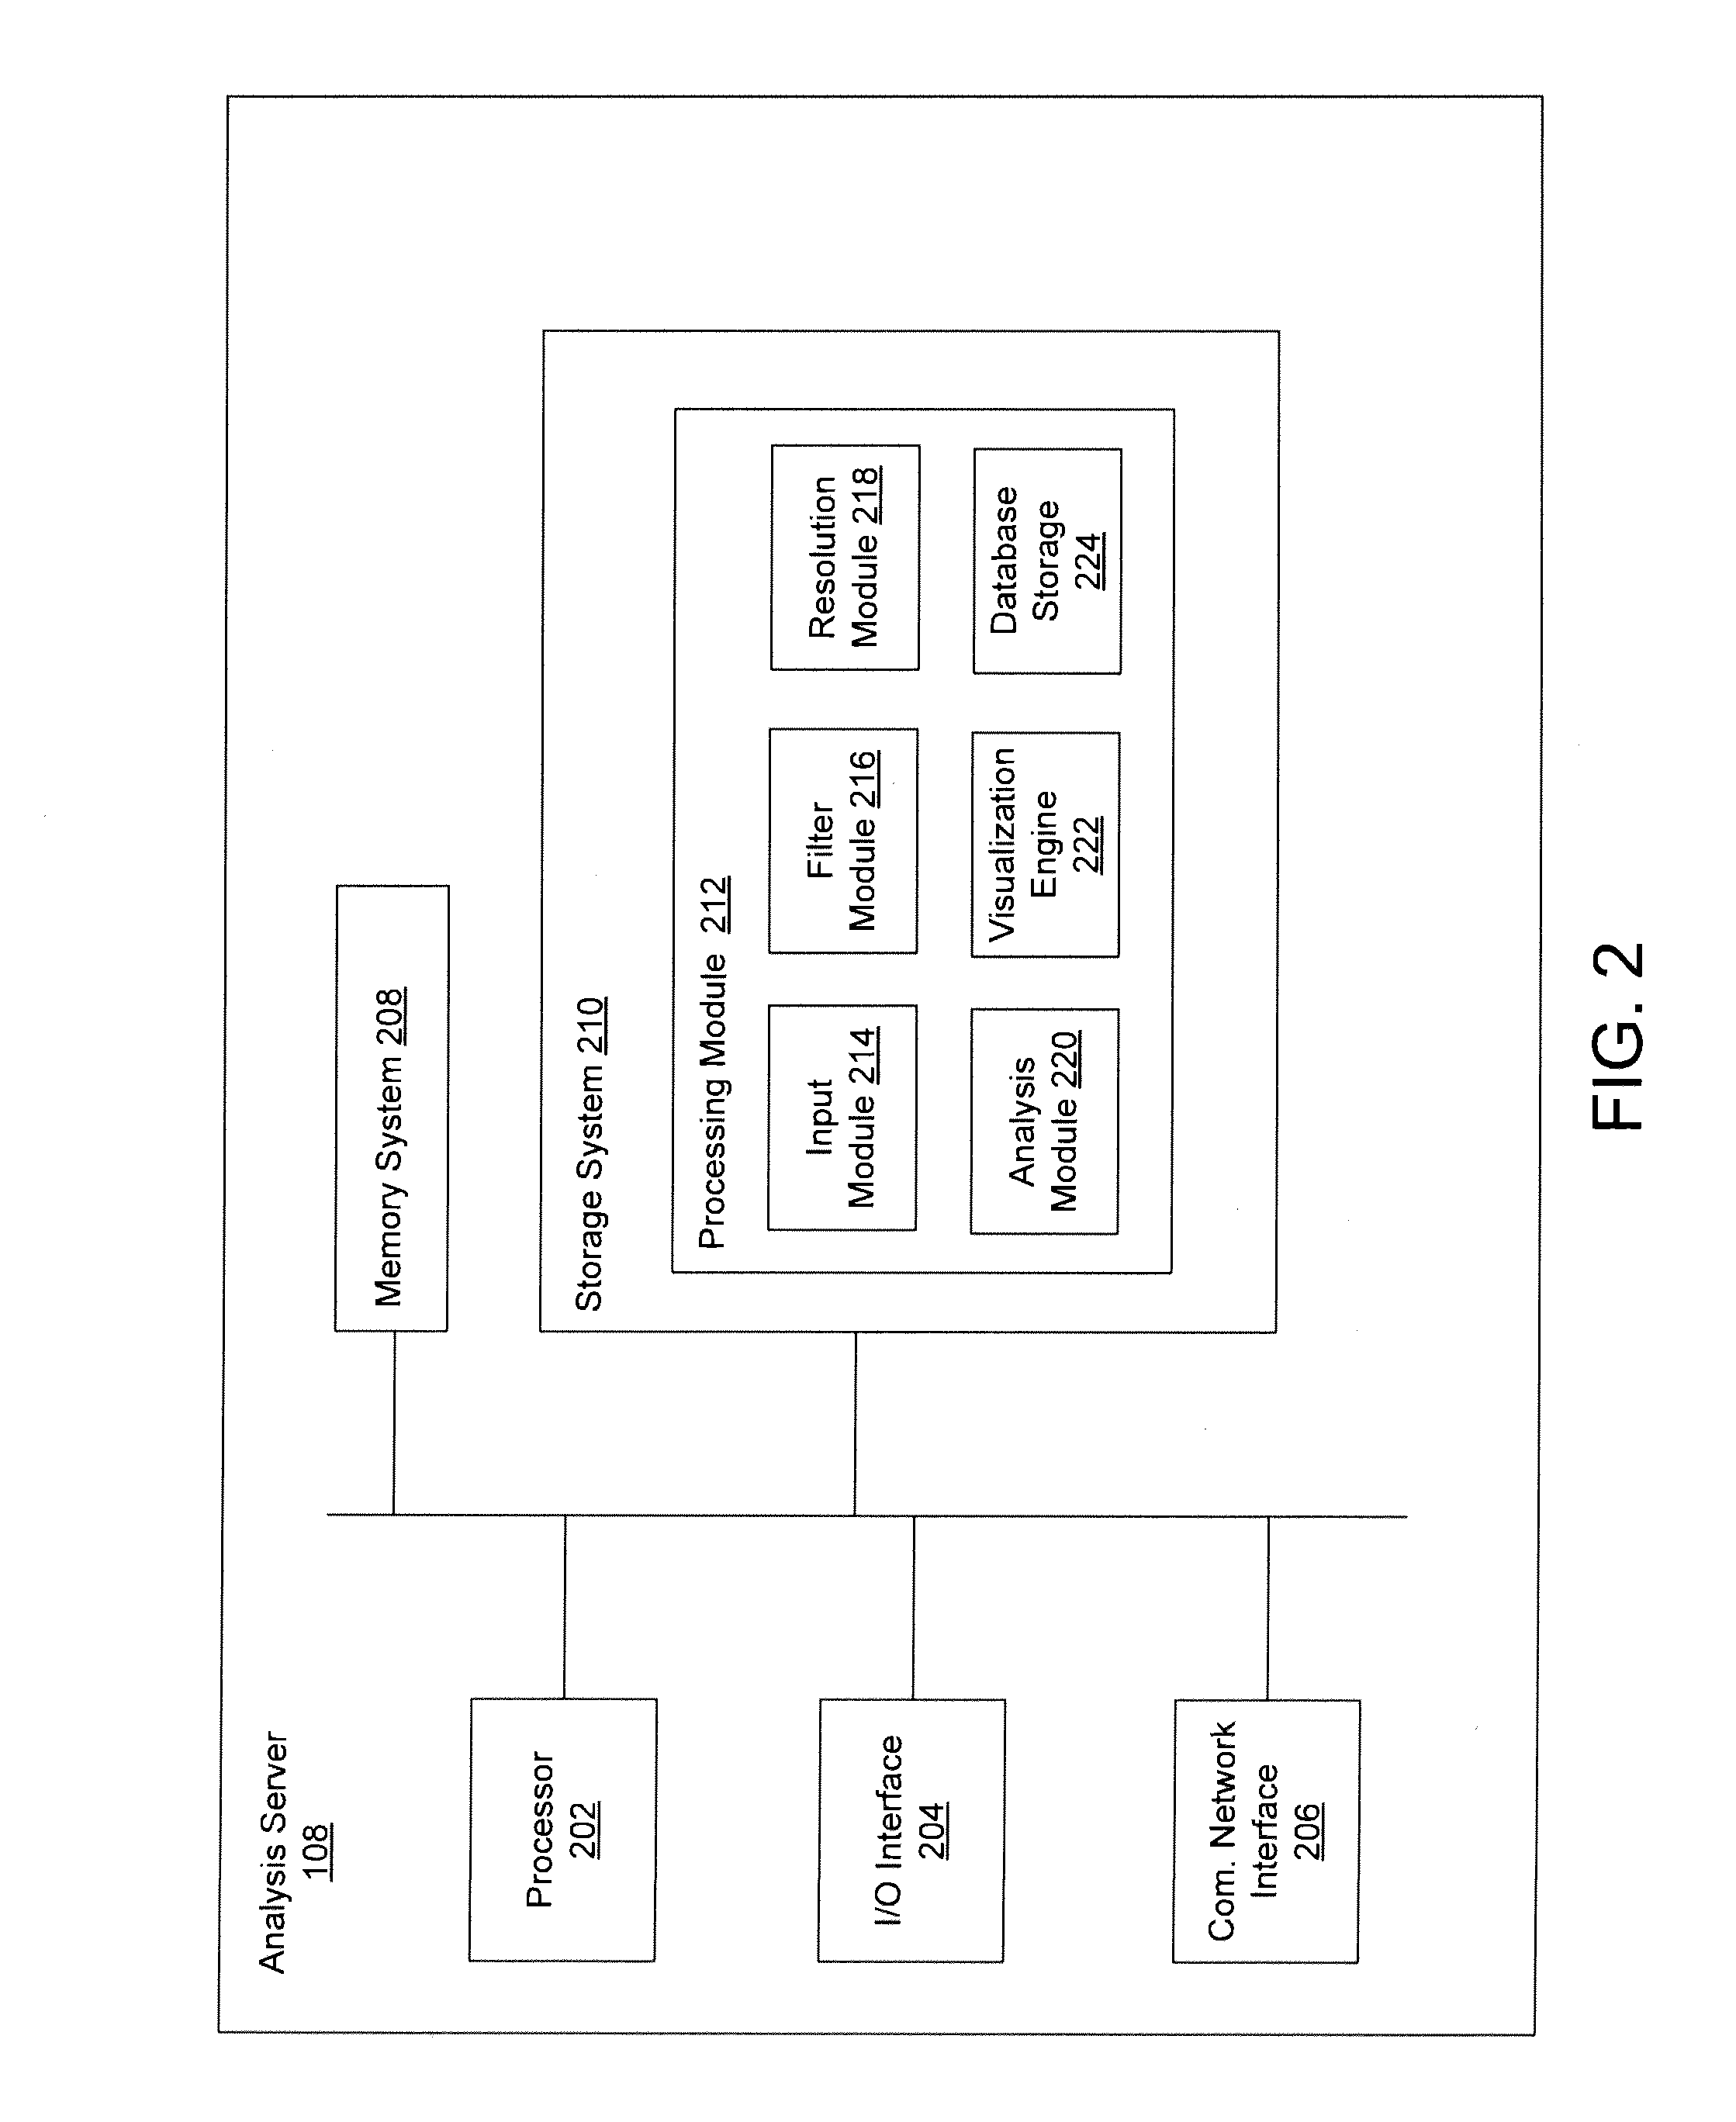 Systems and Methods for Visualization of Data Analysis